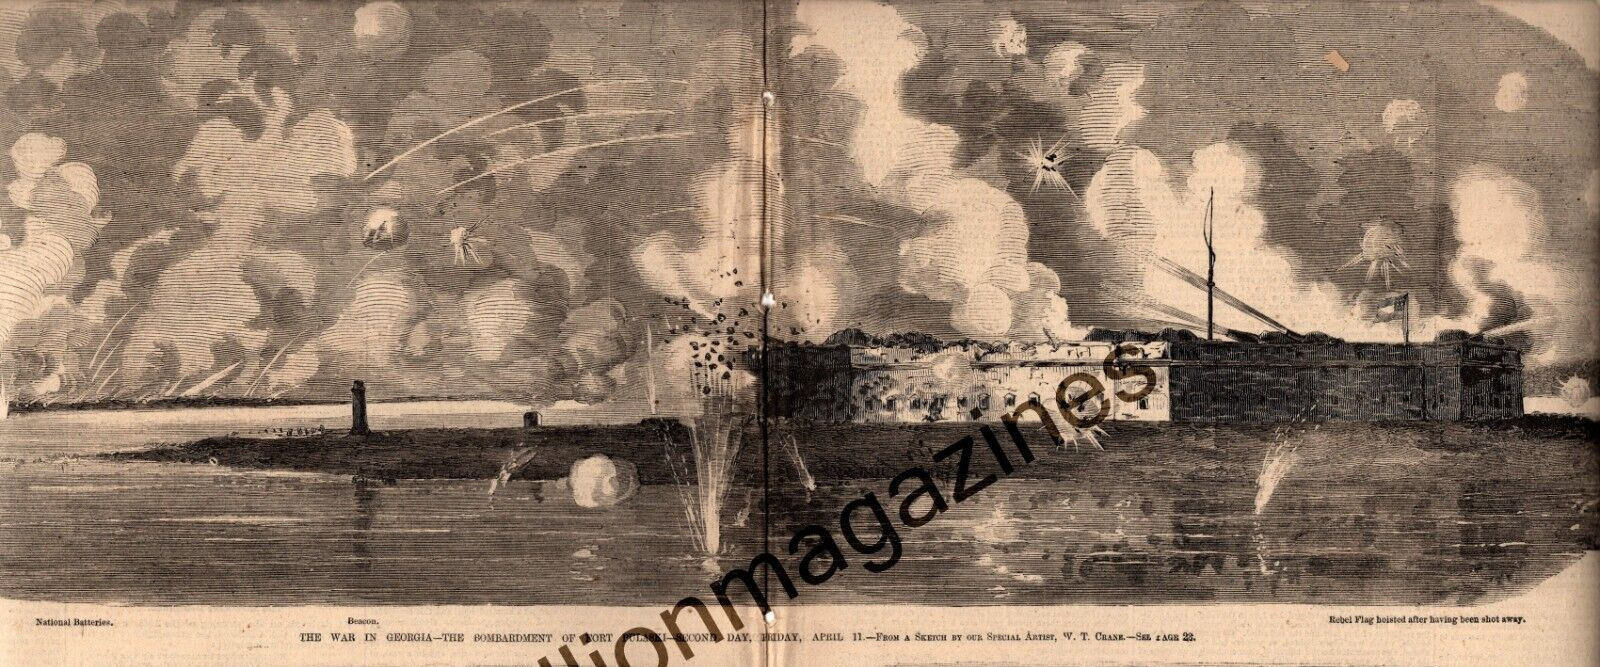 1862 Leslie's Weekly Centerfold May 3 - Bombardment of Fort Pulaski